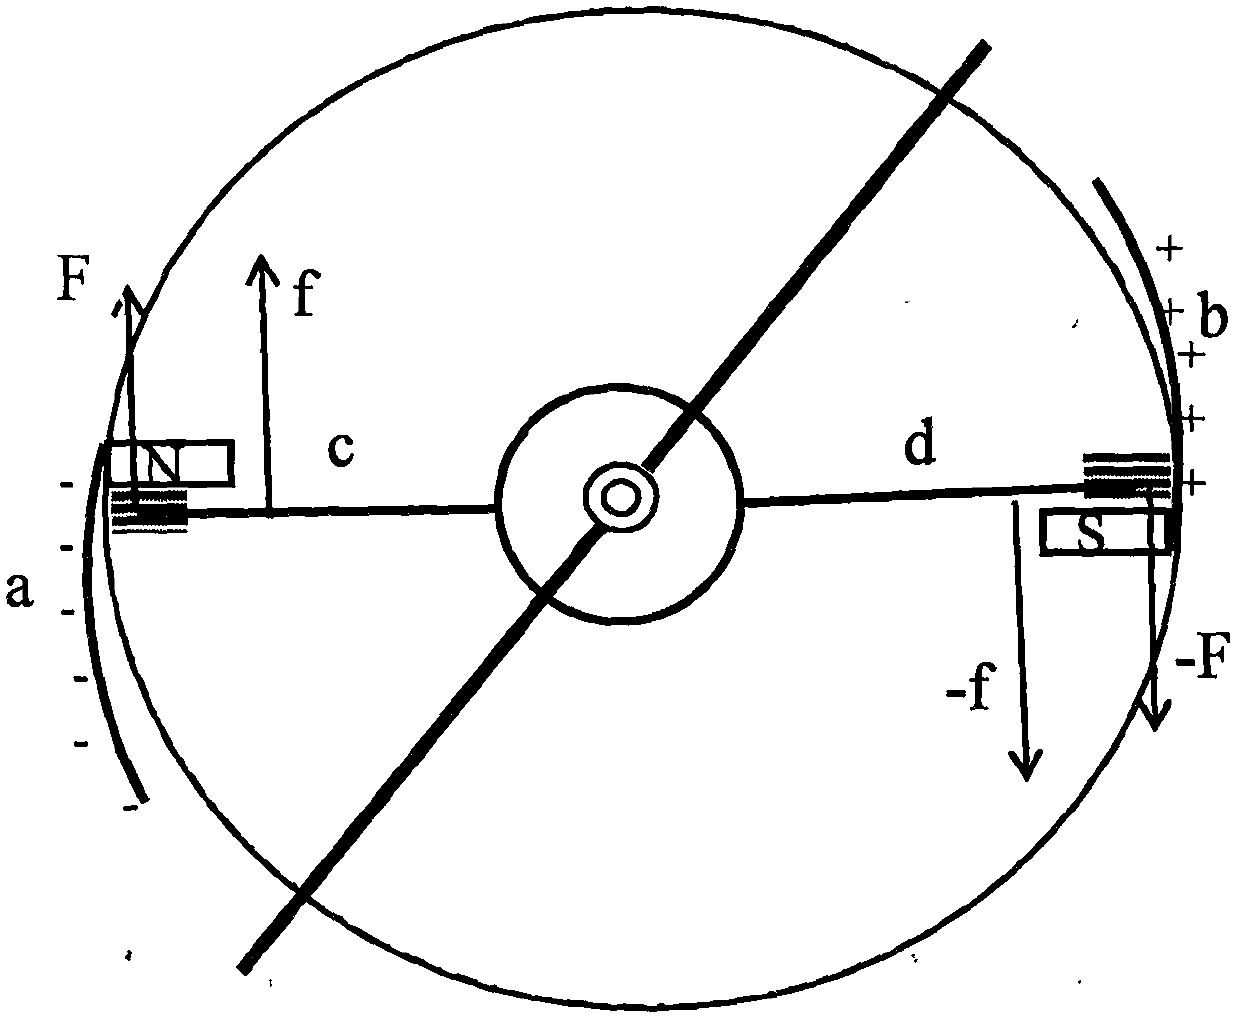 A dynamical machine experimental instrument driven by ampere force and electrostatic force